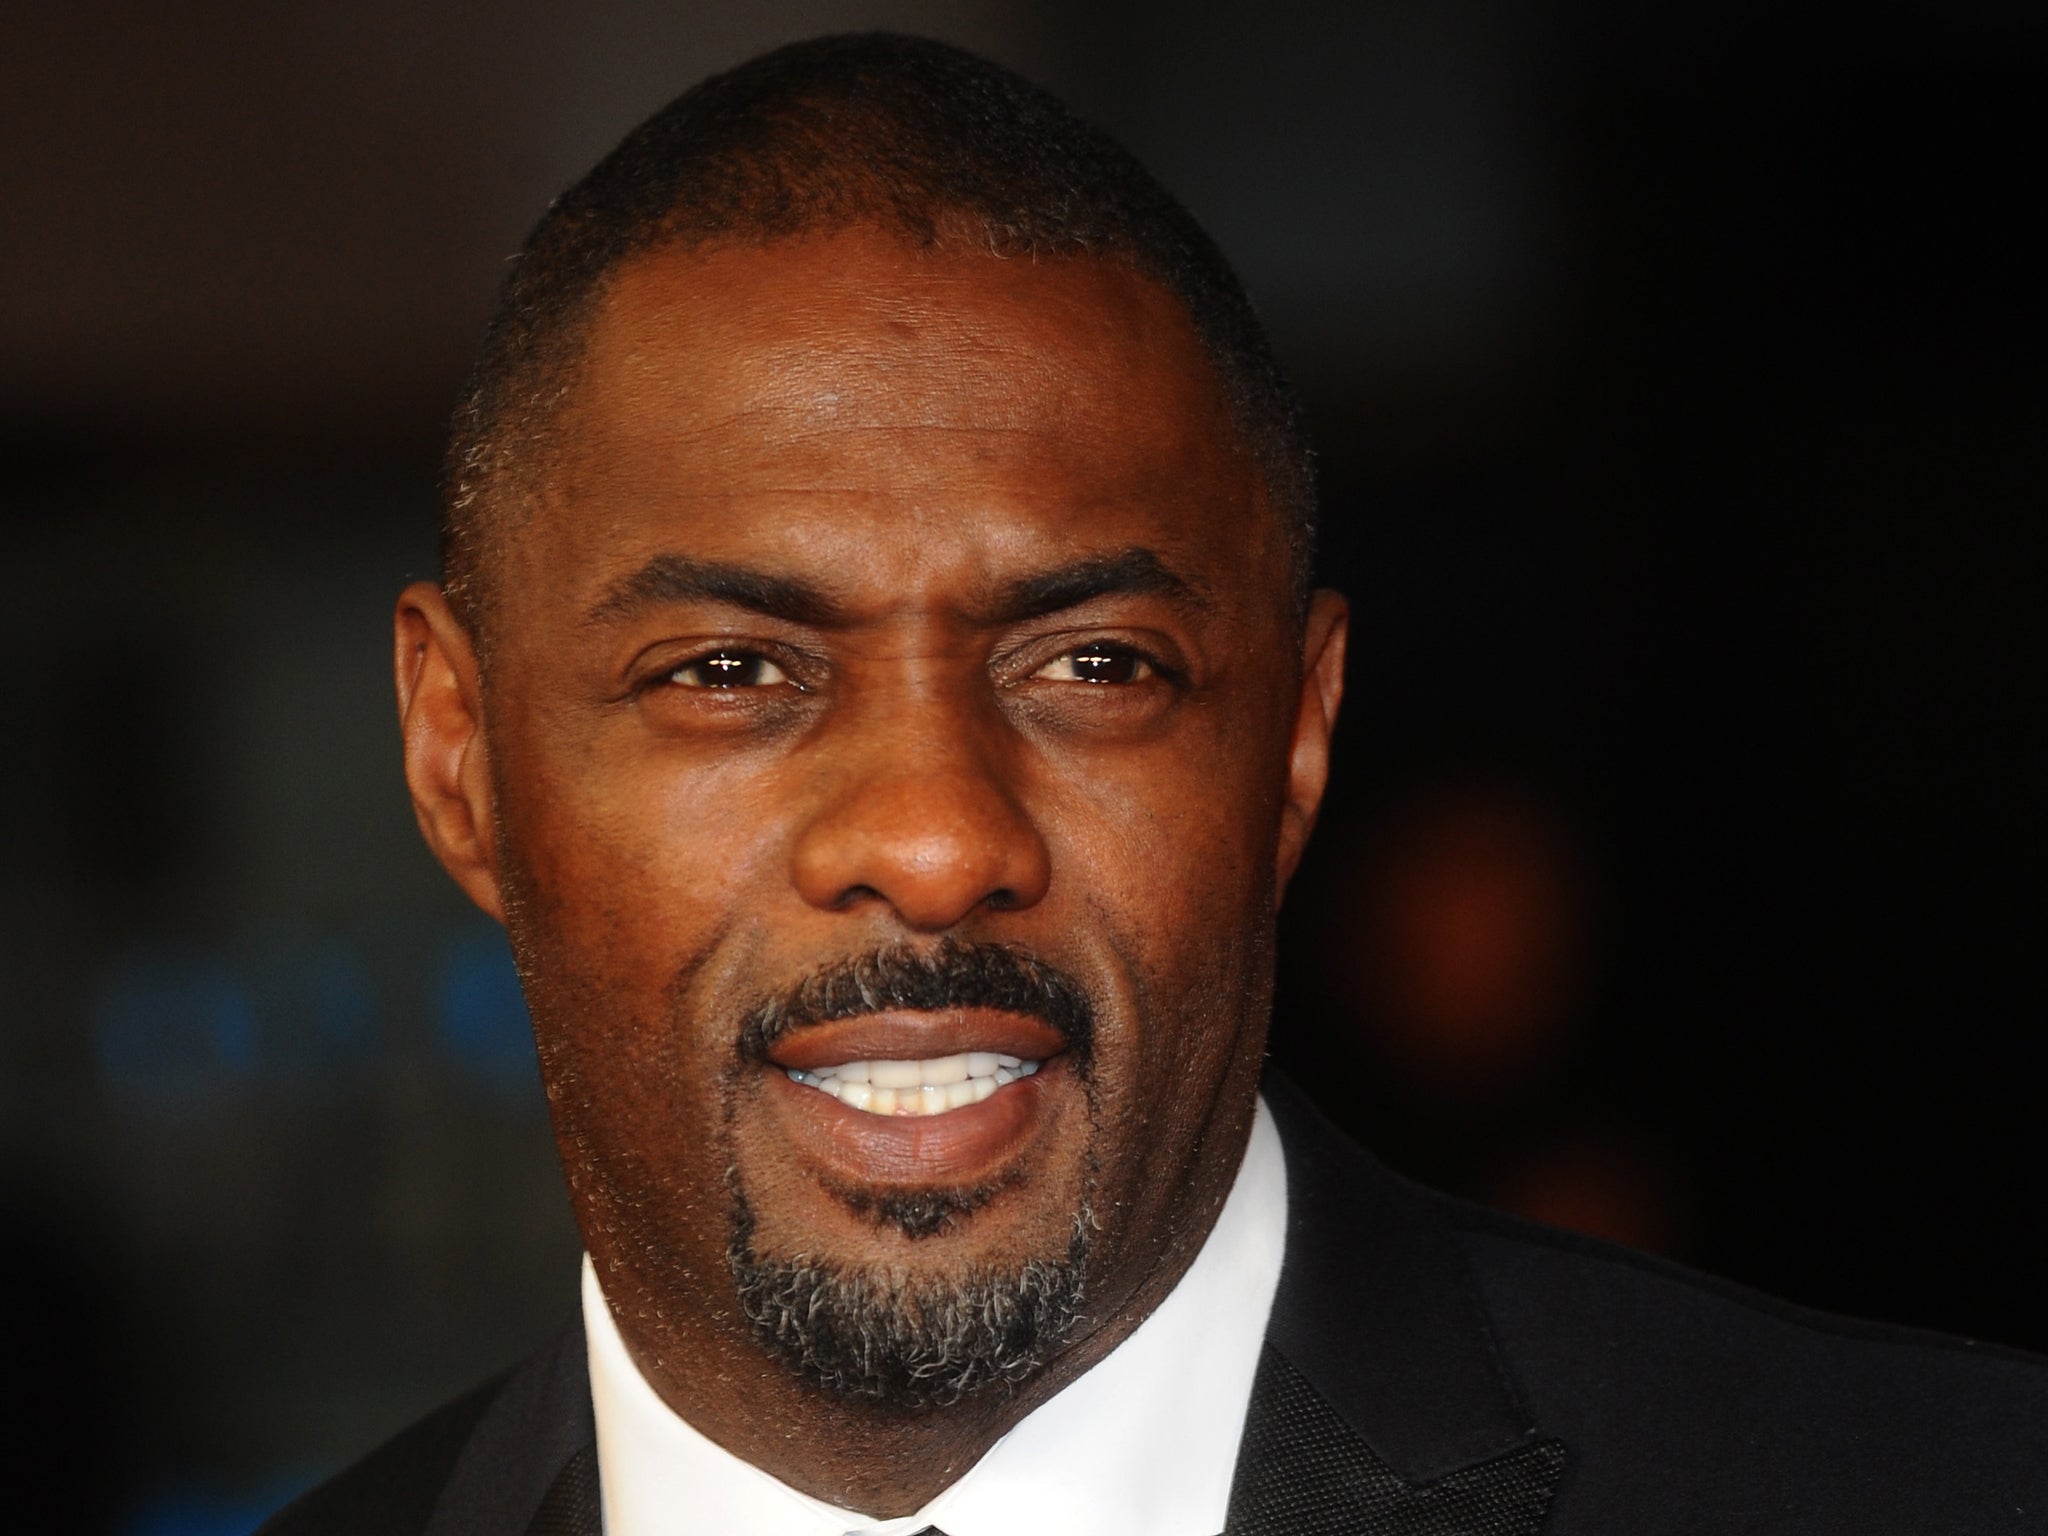 British actor Idris Elba is also a DJ and rapper who played Ibiza last summer